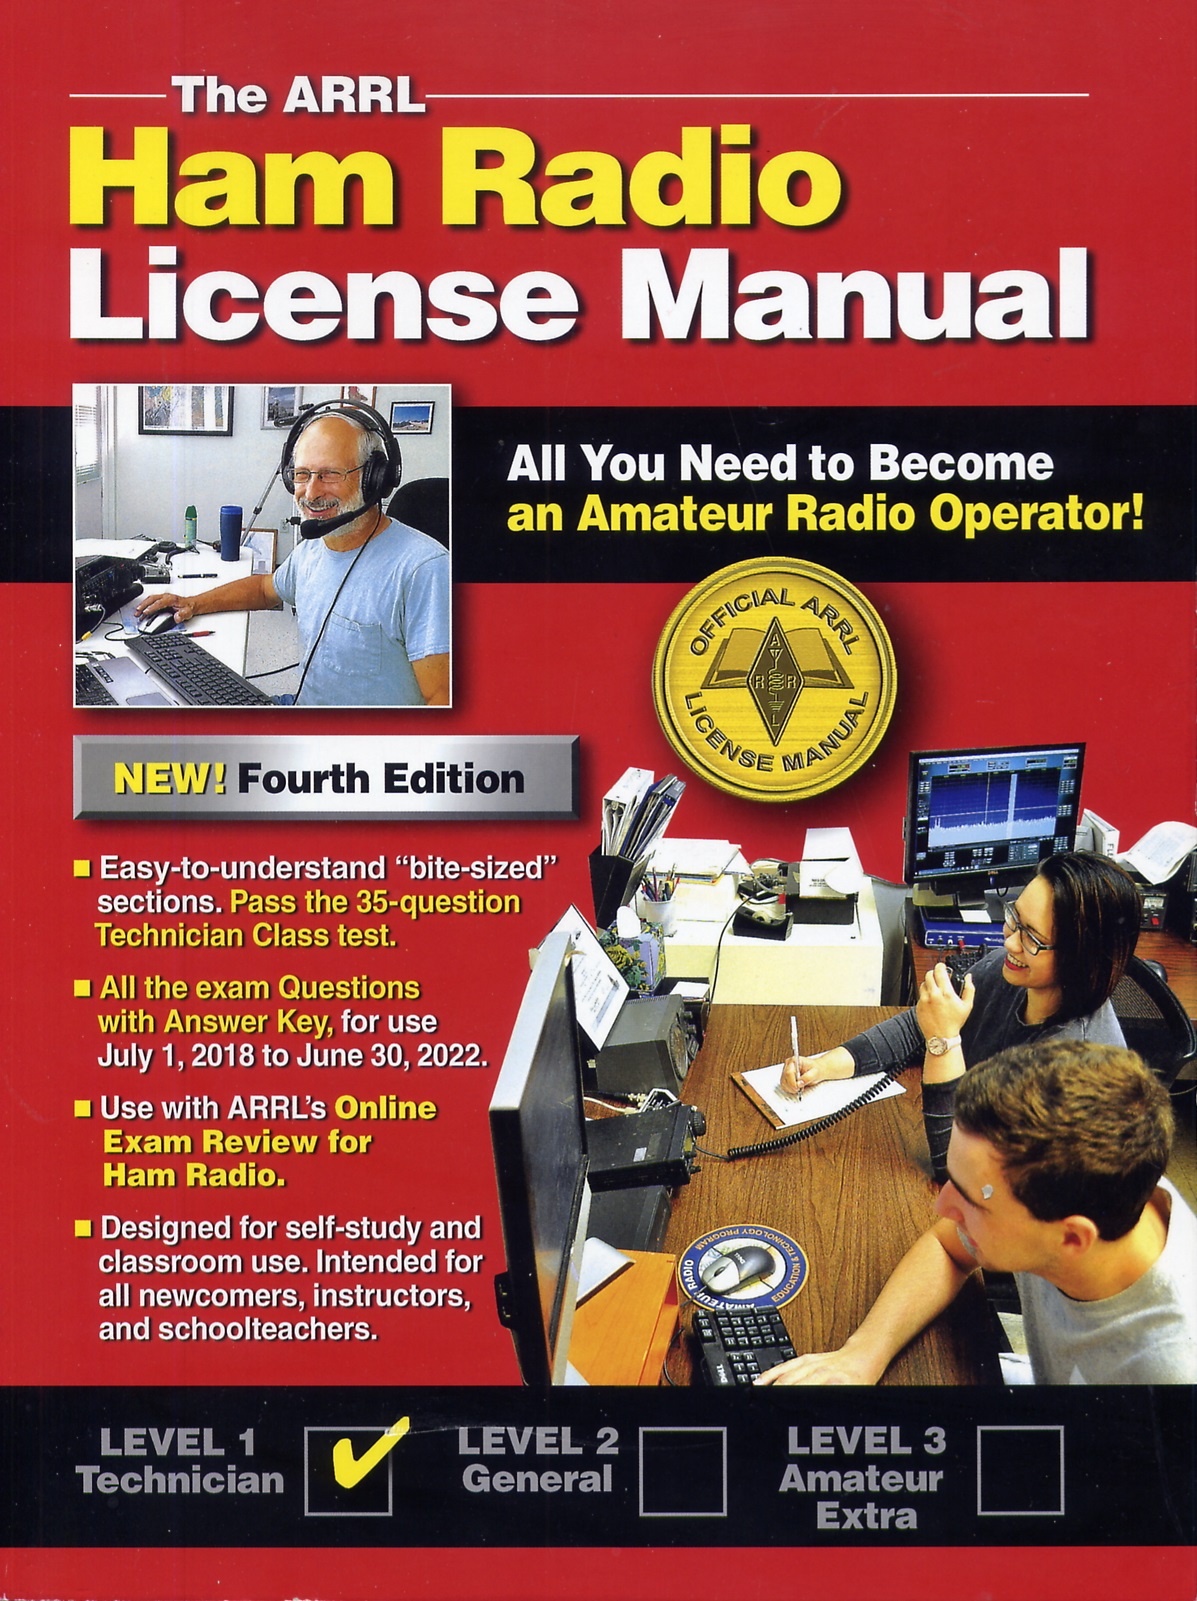 All You Need to Become an Amateur Radio Operator The ARRL Ham Radio License Manual 